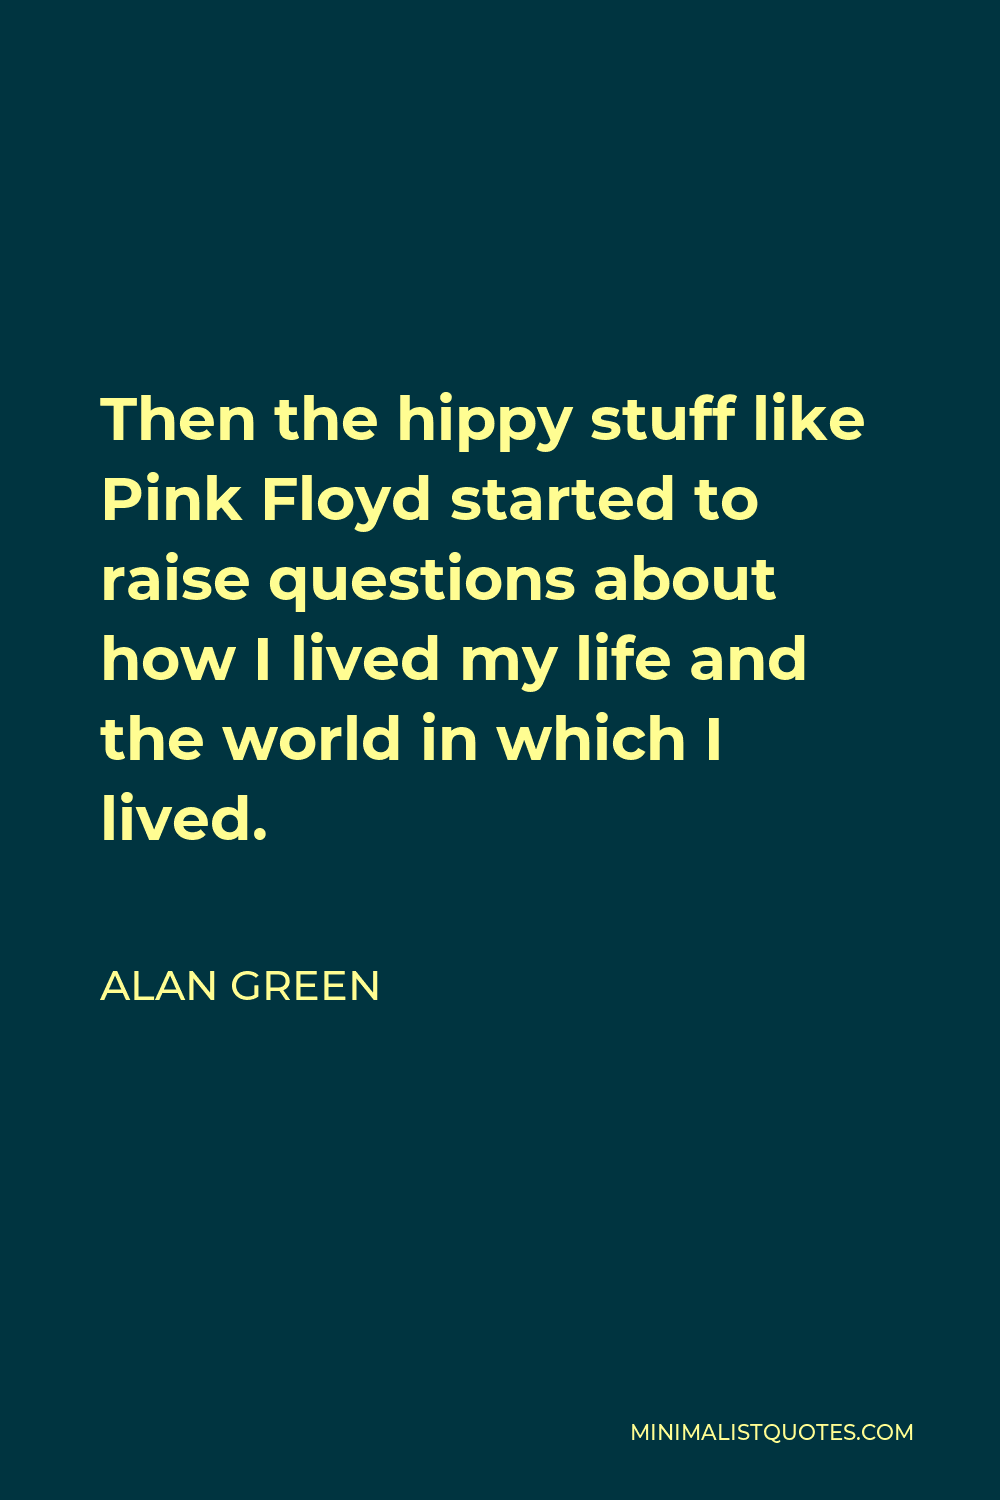 Alan Green Quote - Then the hippy stuff like Pink Floyd started to raise questions about how I lived my life and the world in which I lived.